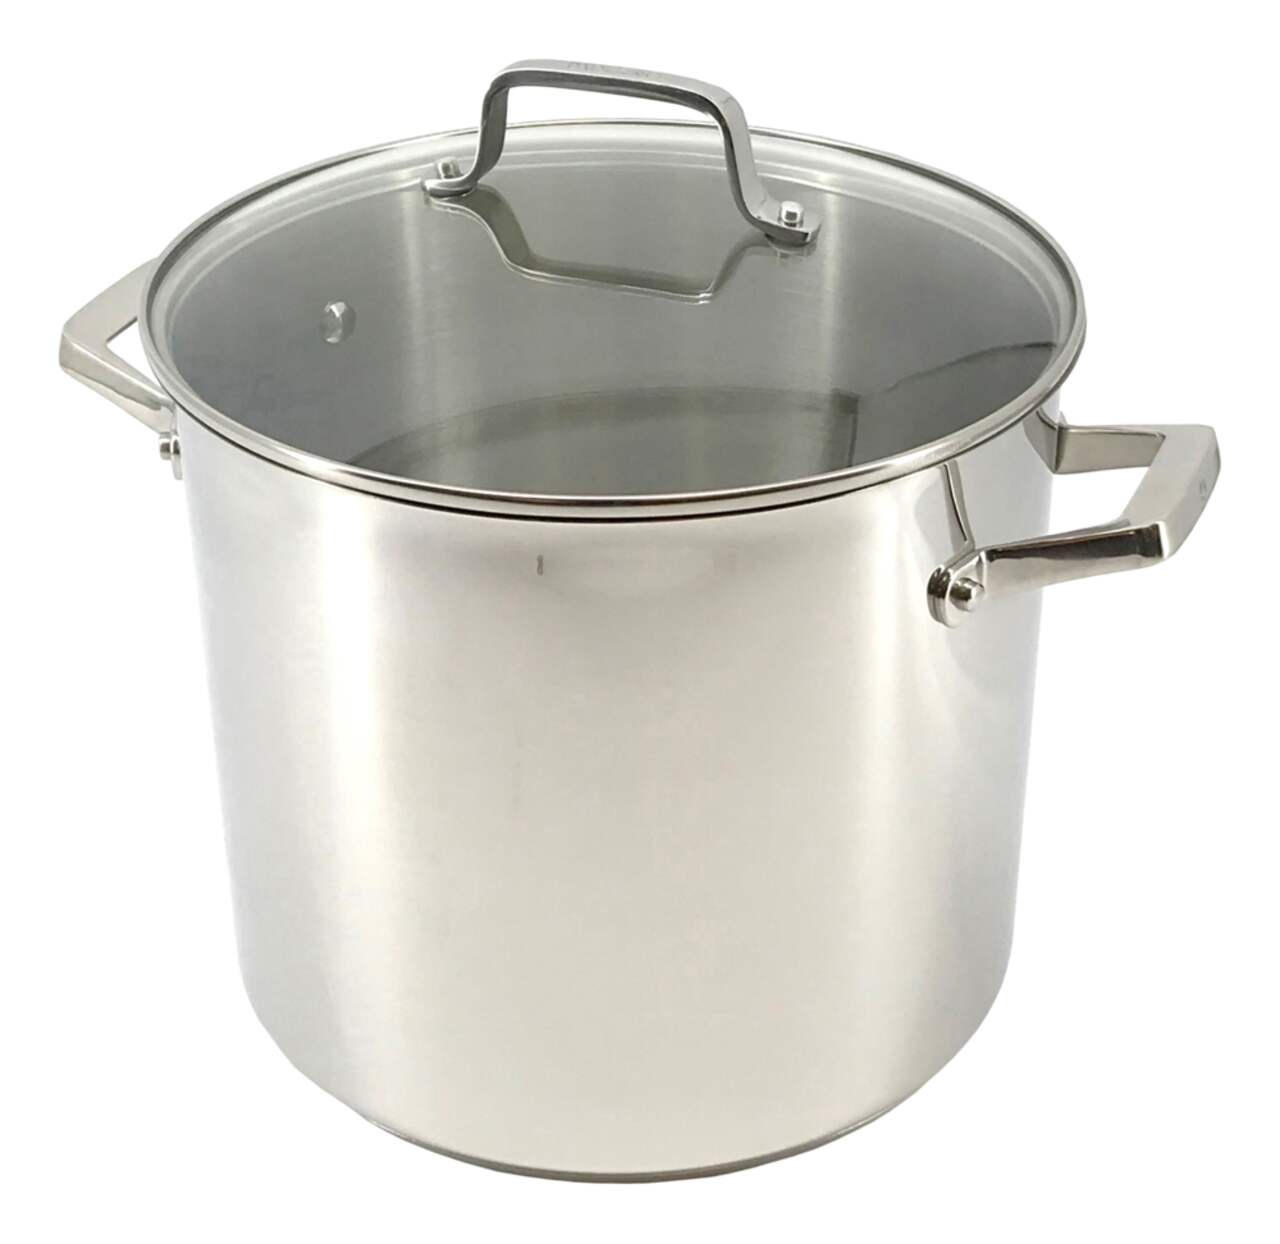 Large 158 1/2 Quart Stainless Steel Stock Pot by Paderno no lid France Italy